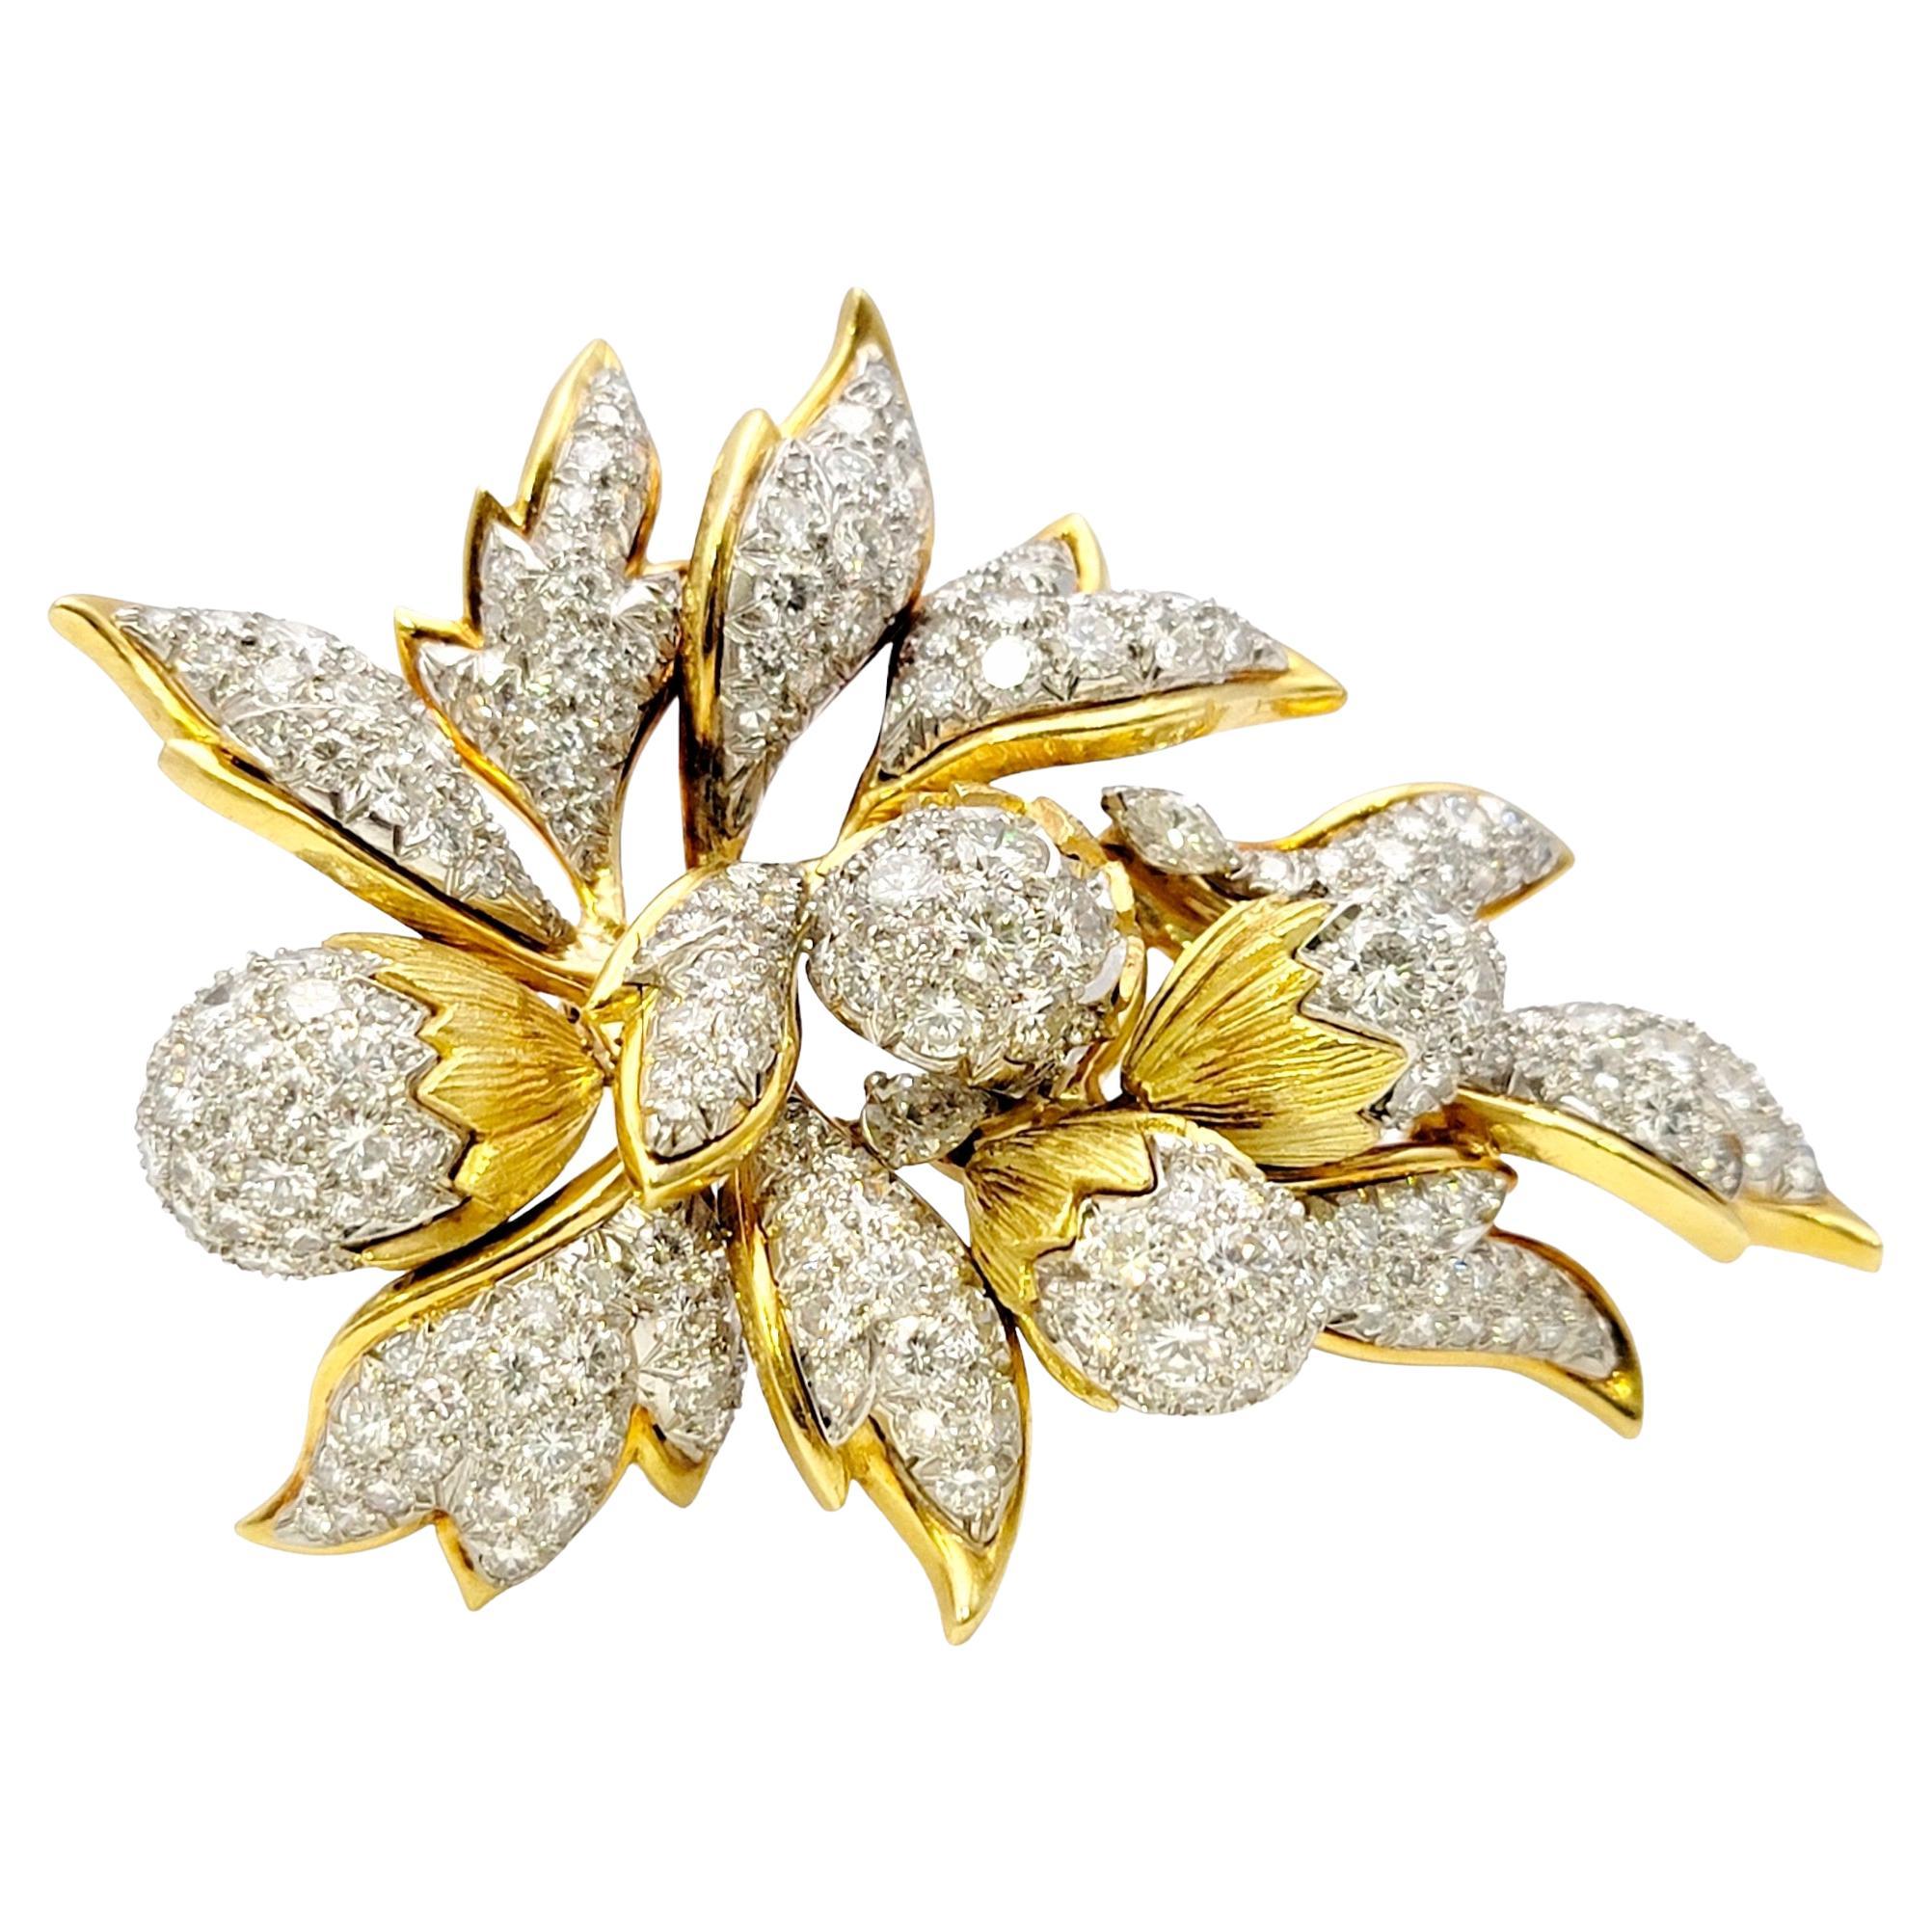 Indulge in the allure of nature's beauty with this enchanting vintage lady's brooch. Expertly crafted in 18 karat gold, this exceptional piece showcases a stunning botanical motif adorned with radiant diamonds. Adding an element of surprise, the